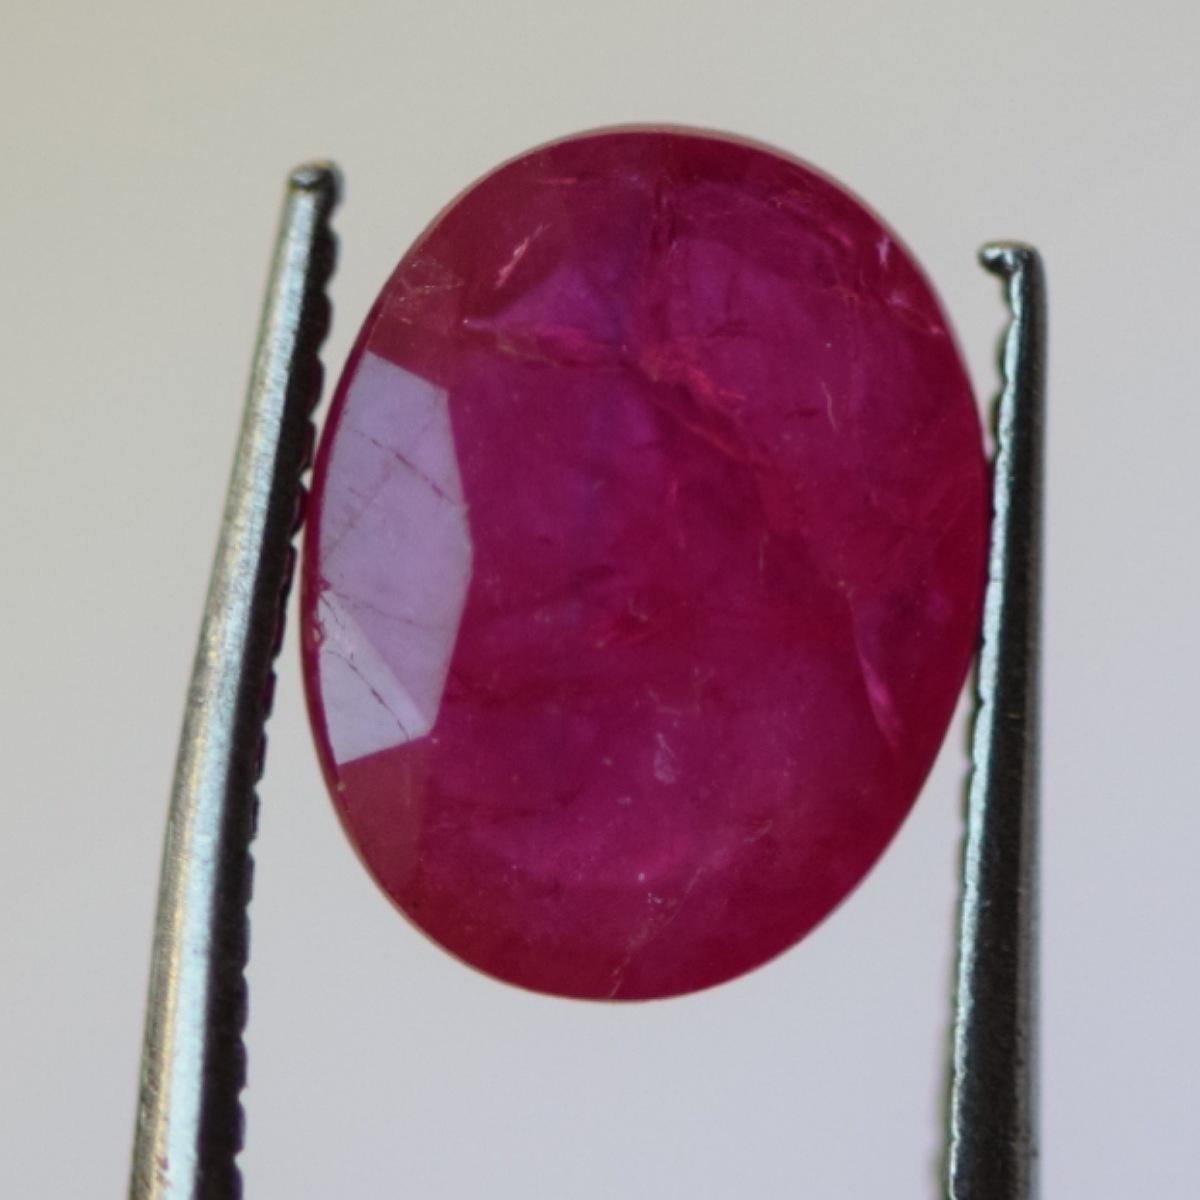 - Species: Natural Corundum
- Variety: Natural Ruby
- Dimensions: 8.98 x 6.94 x 2.92 mm
- Shape / Cut: Oval Mixed Cut
- Weight: 1.89 carat
- Clarity: Translucent
- Color: Pink Red
- Characteristics: Enhanced. Natural rubies are commonly enhanced